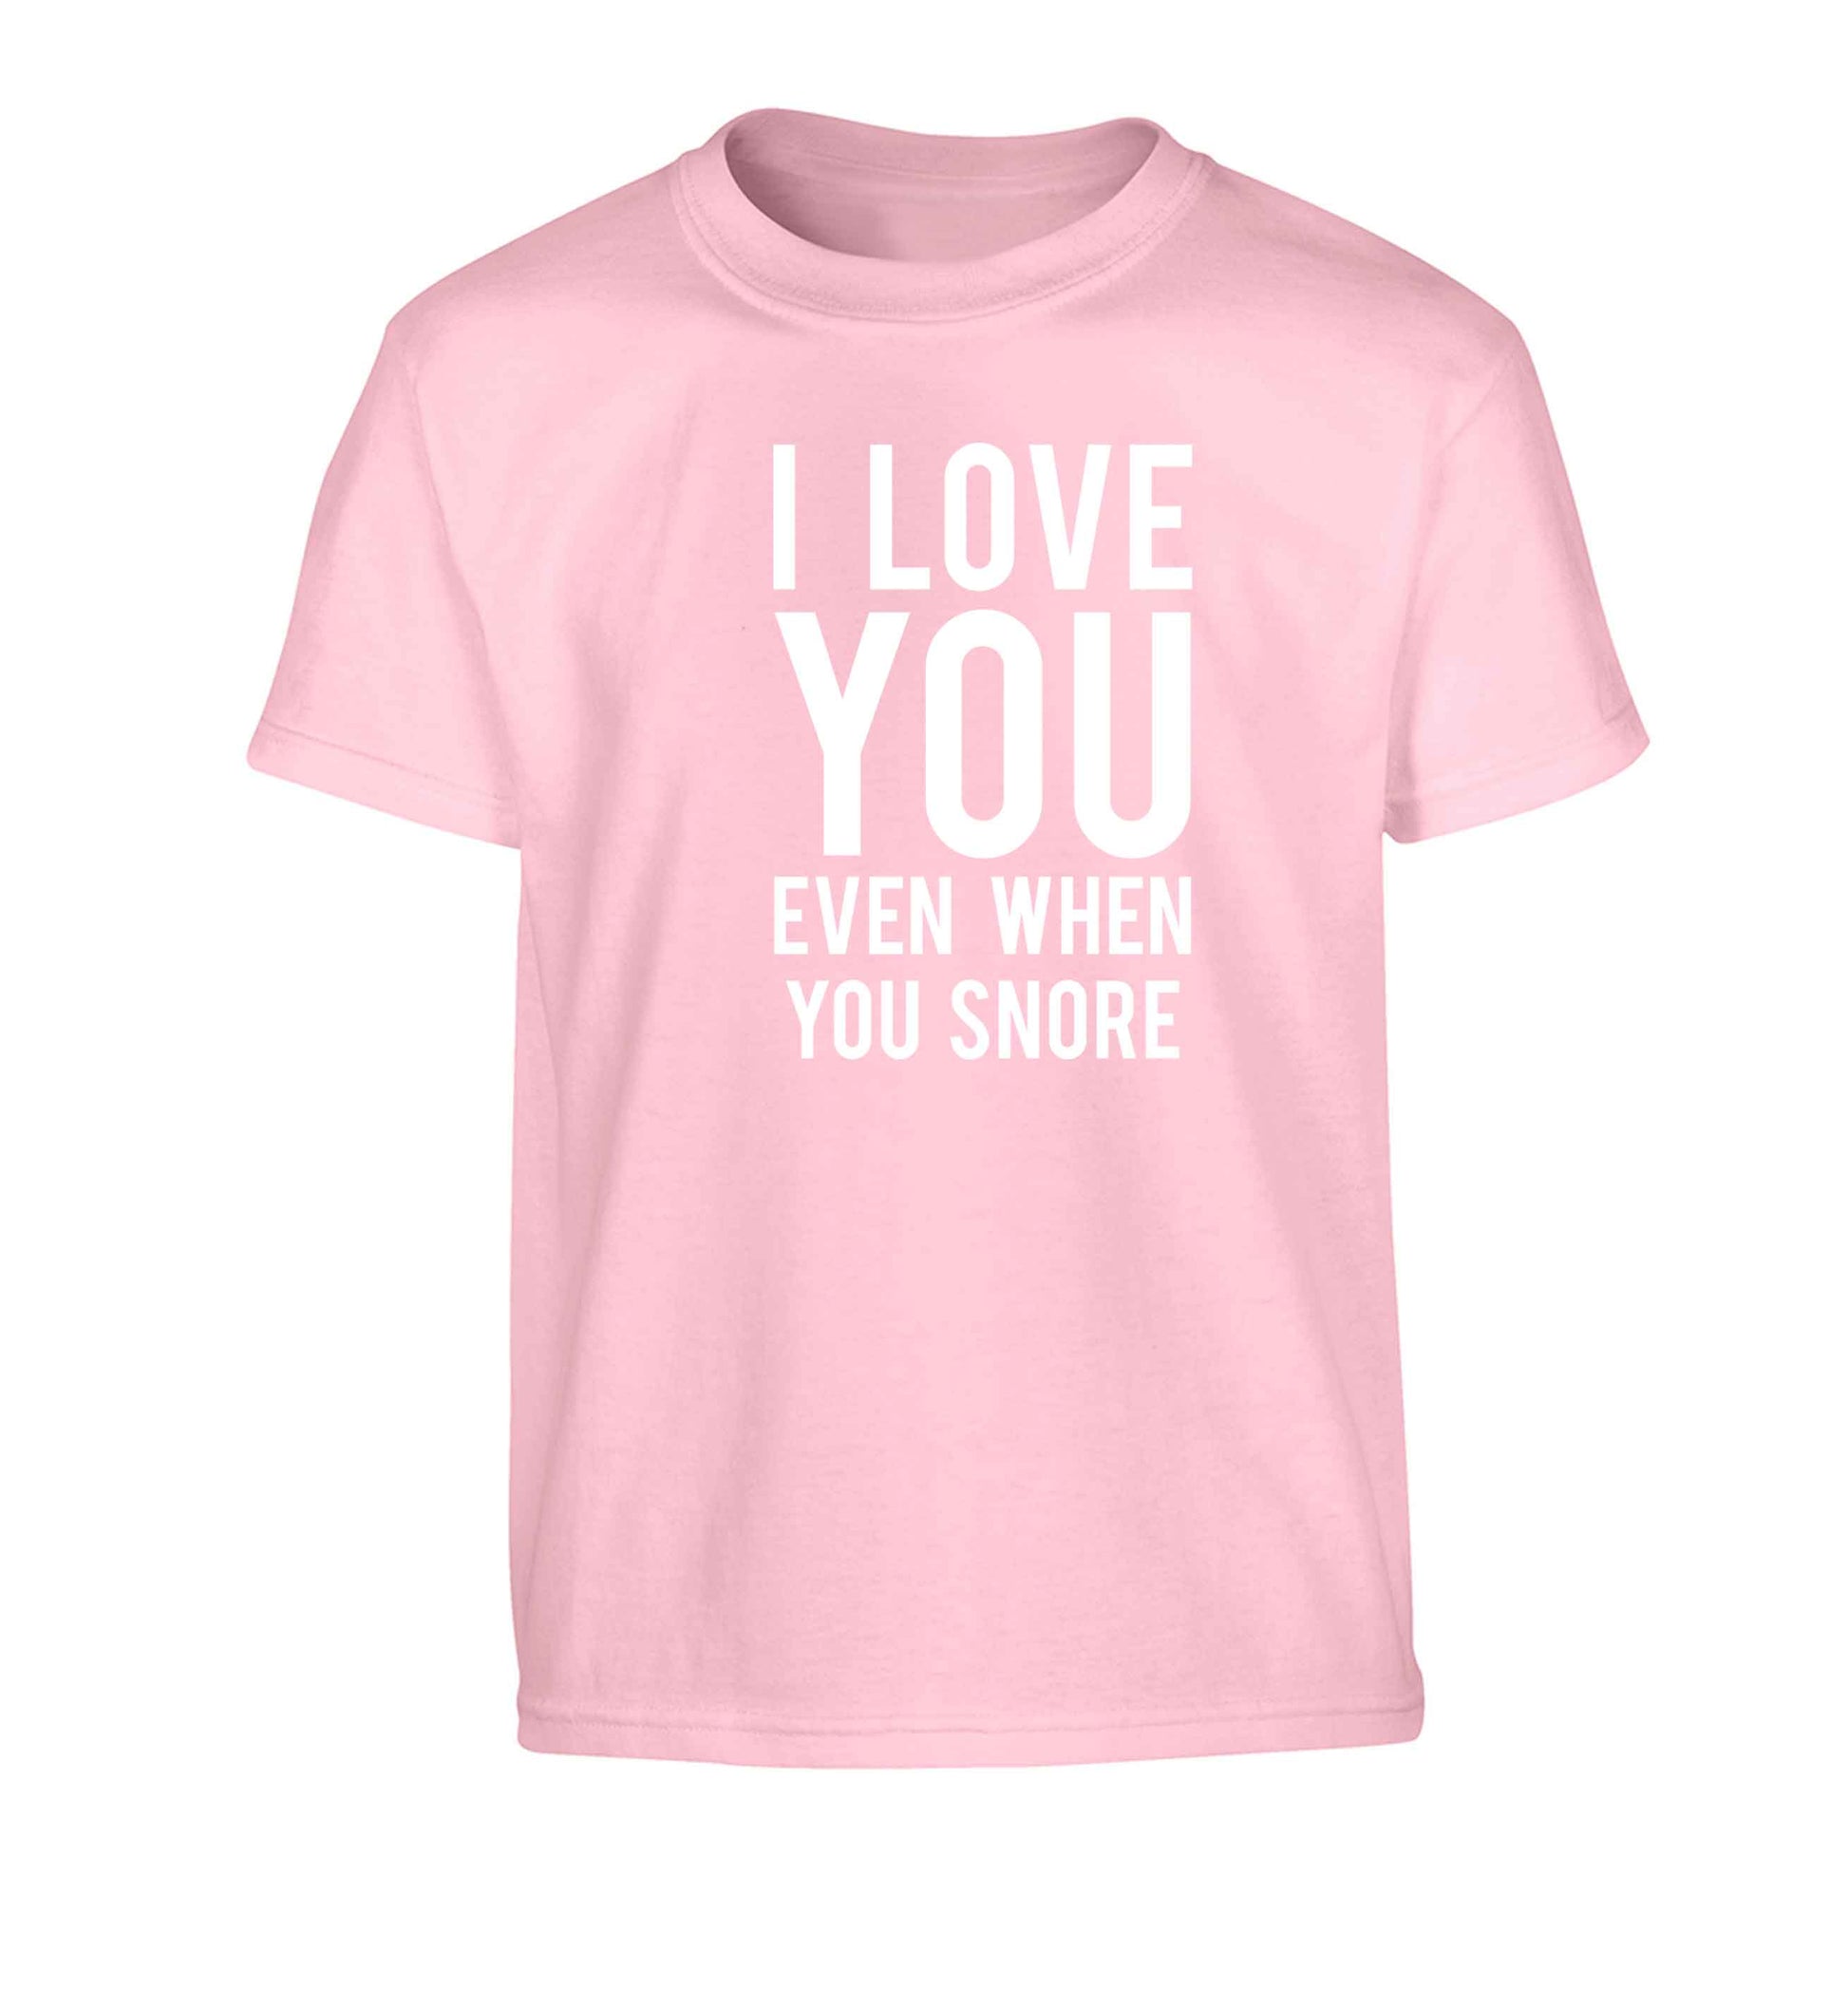 I love you even when you snore Children's light pink Tshirt 12-13 Years